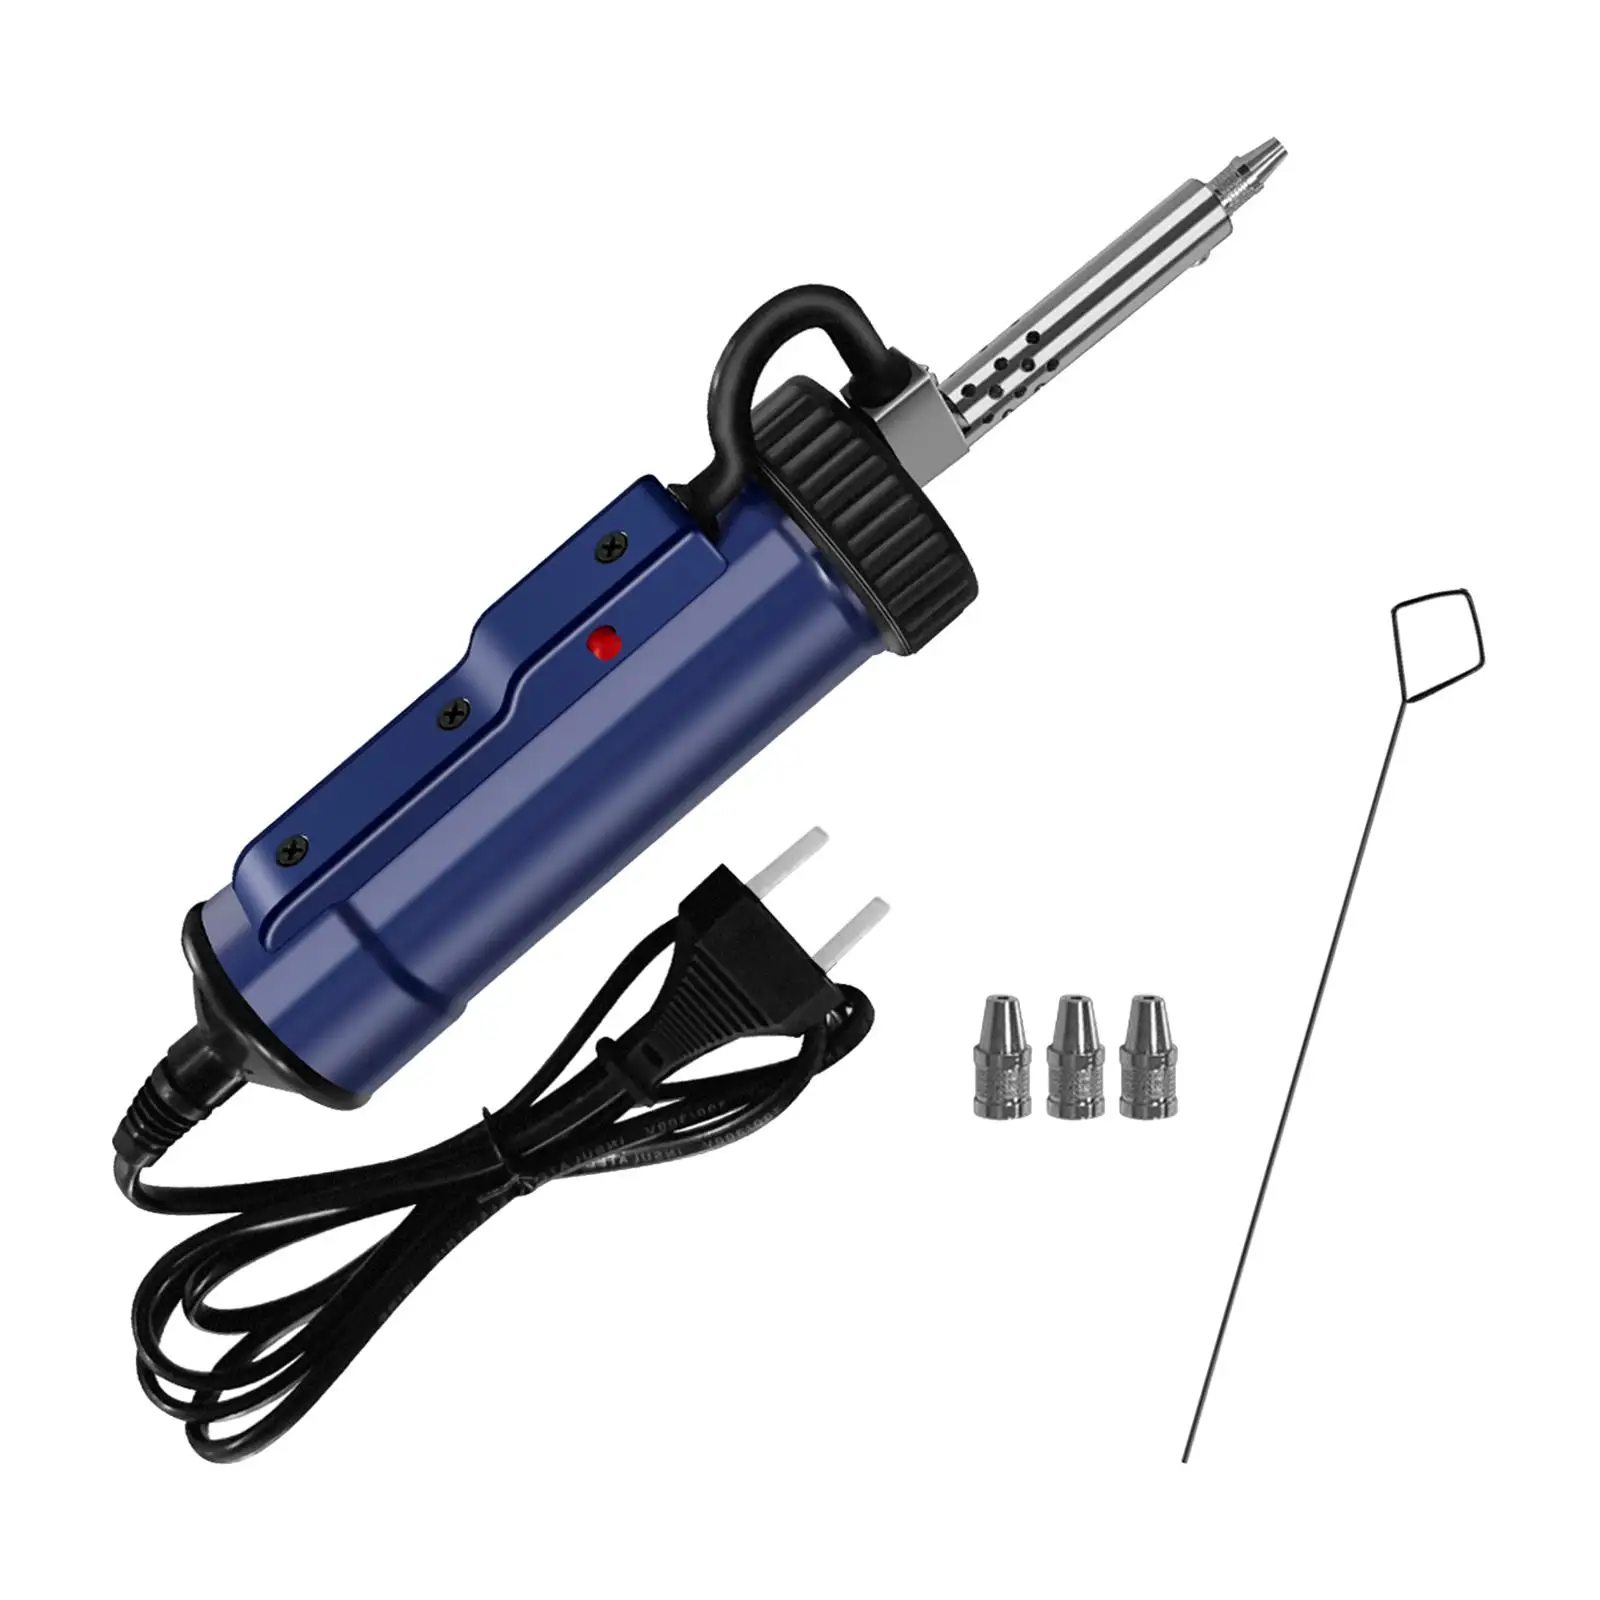 Handheld Solder Removal Tool Electric Solder Tin suckers for Appliance Repair